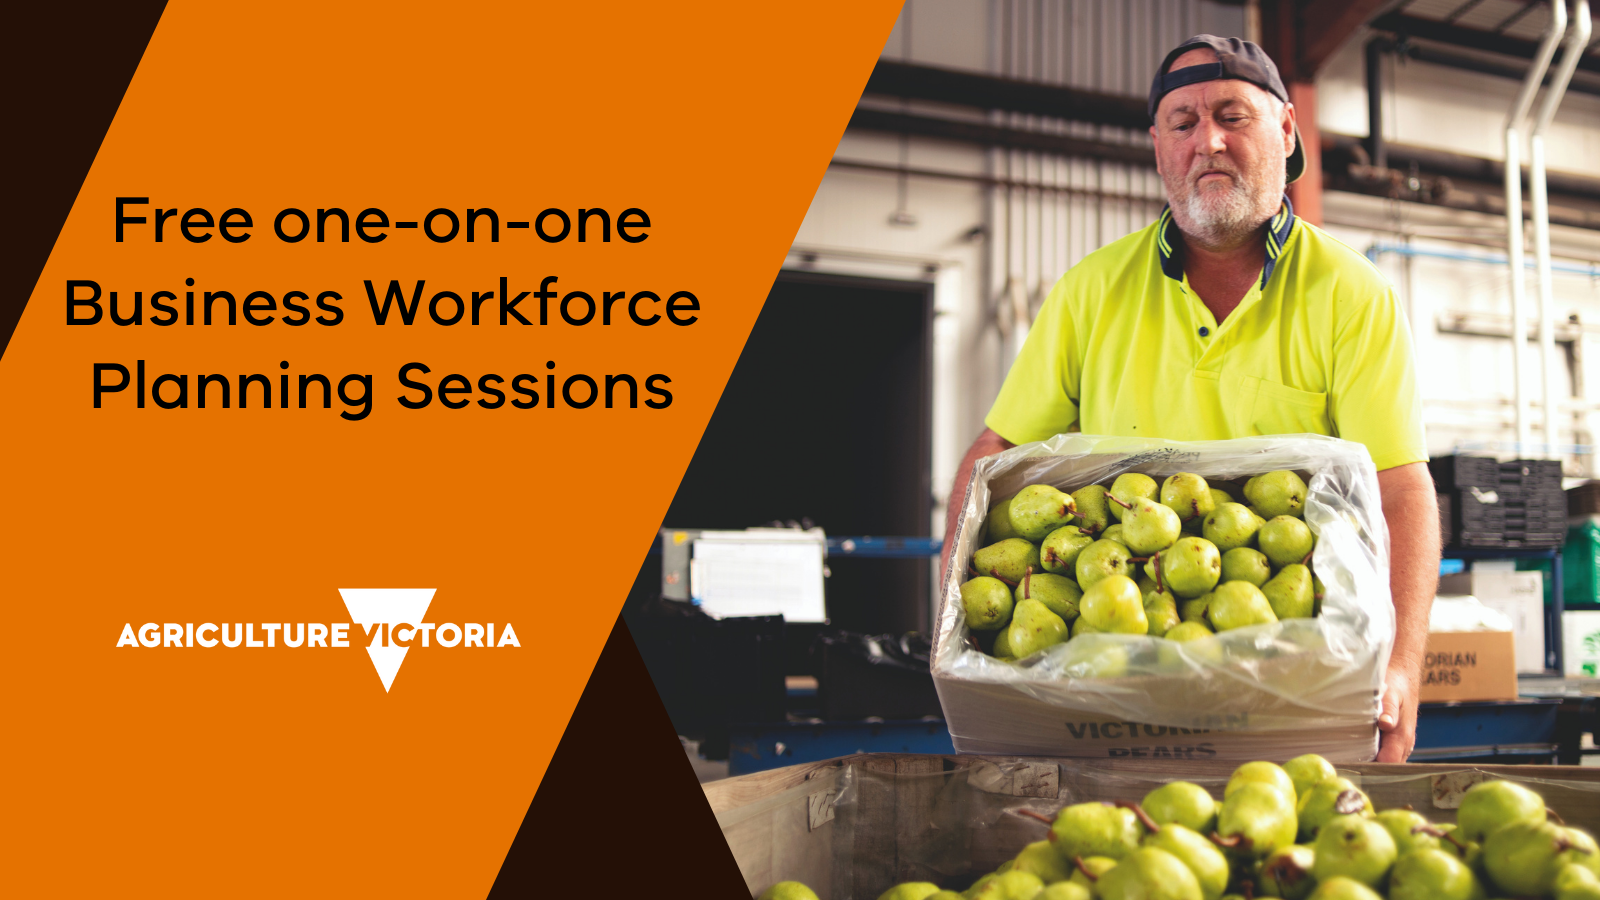 Horticulture Business Workforce Planning sessions